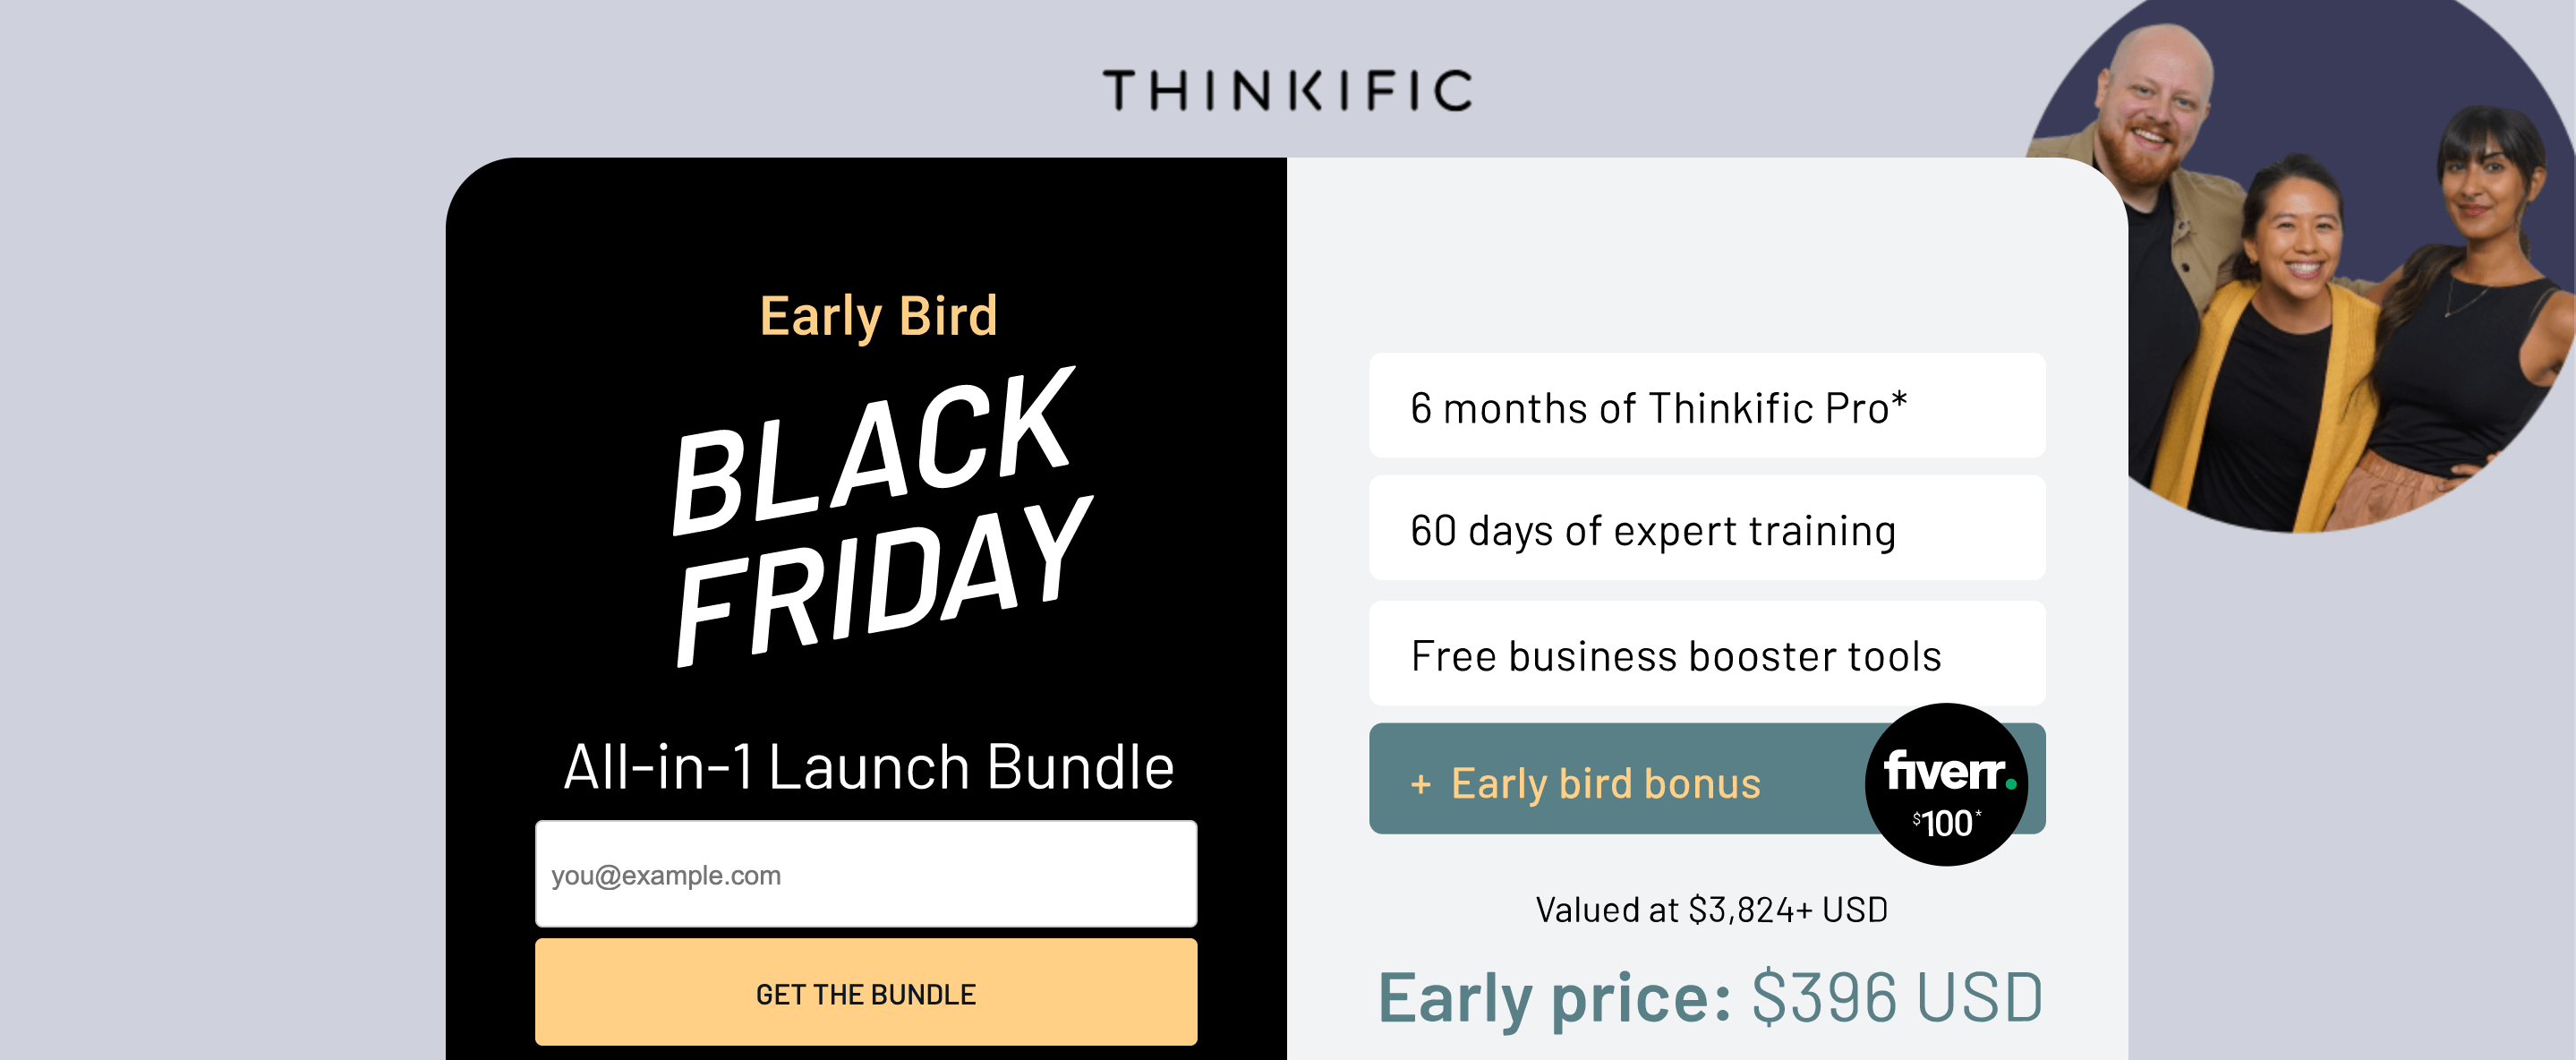 Black Friday software deal from Thinkific